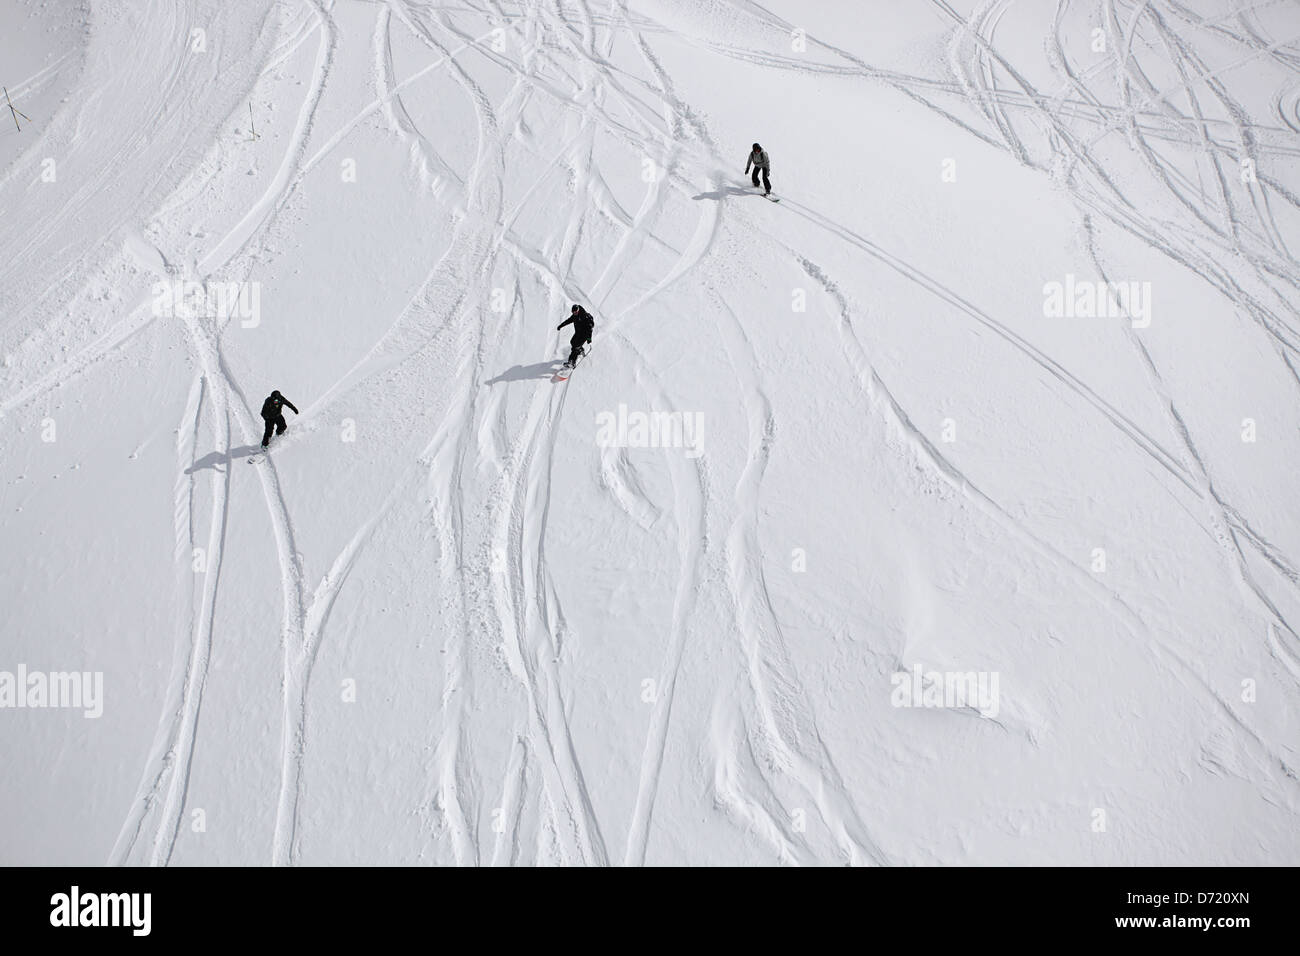 Three snowboarders in action. Typical travel type photo from a skiing holiday in the French Alps Stock Photo